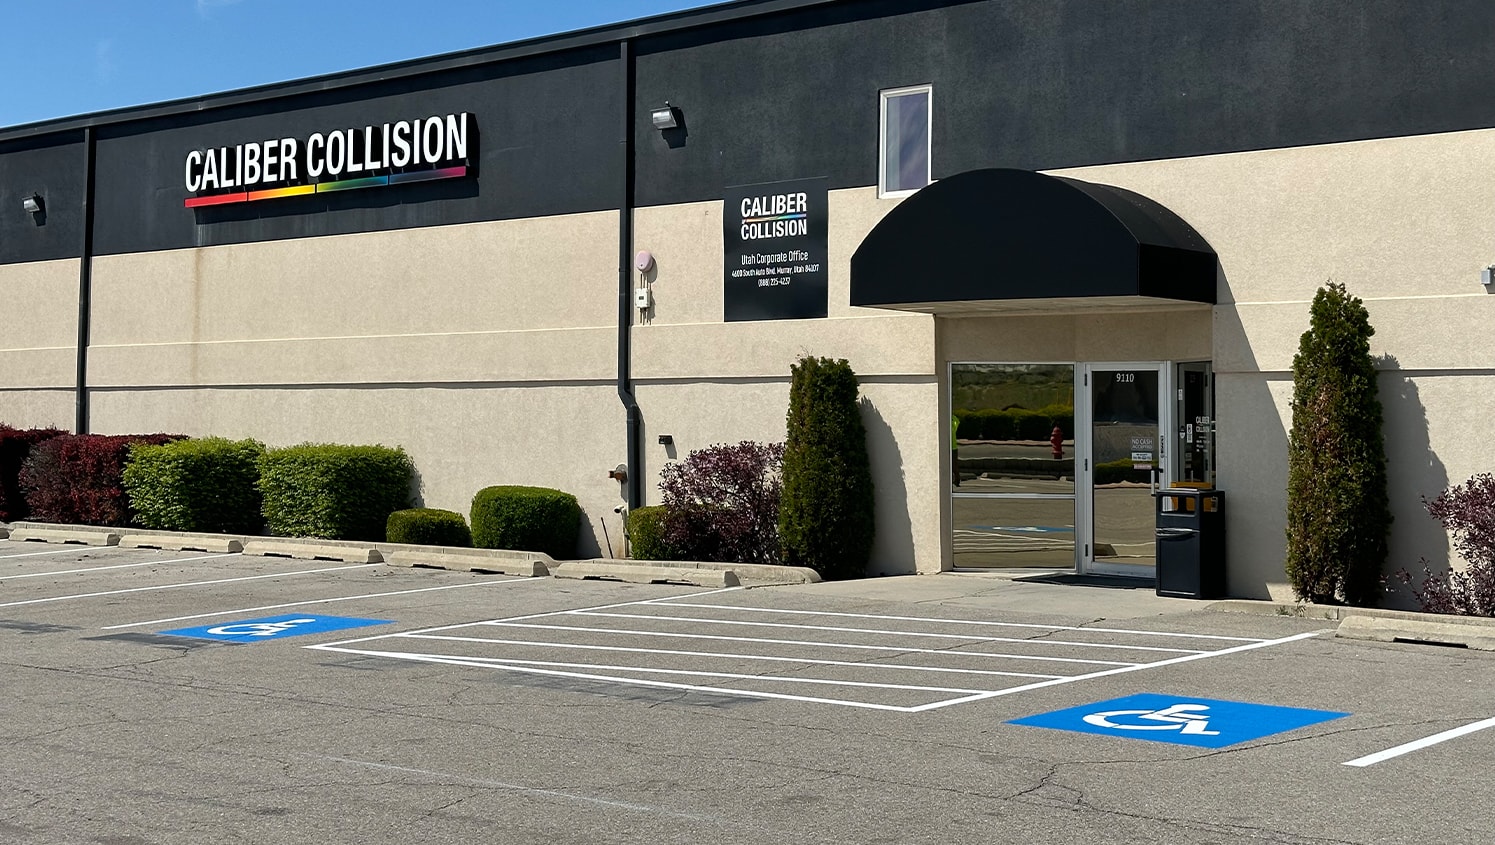 freshly painted parking lot for Caliber Collision